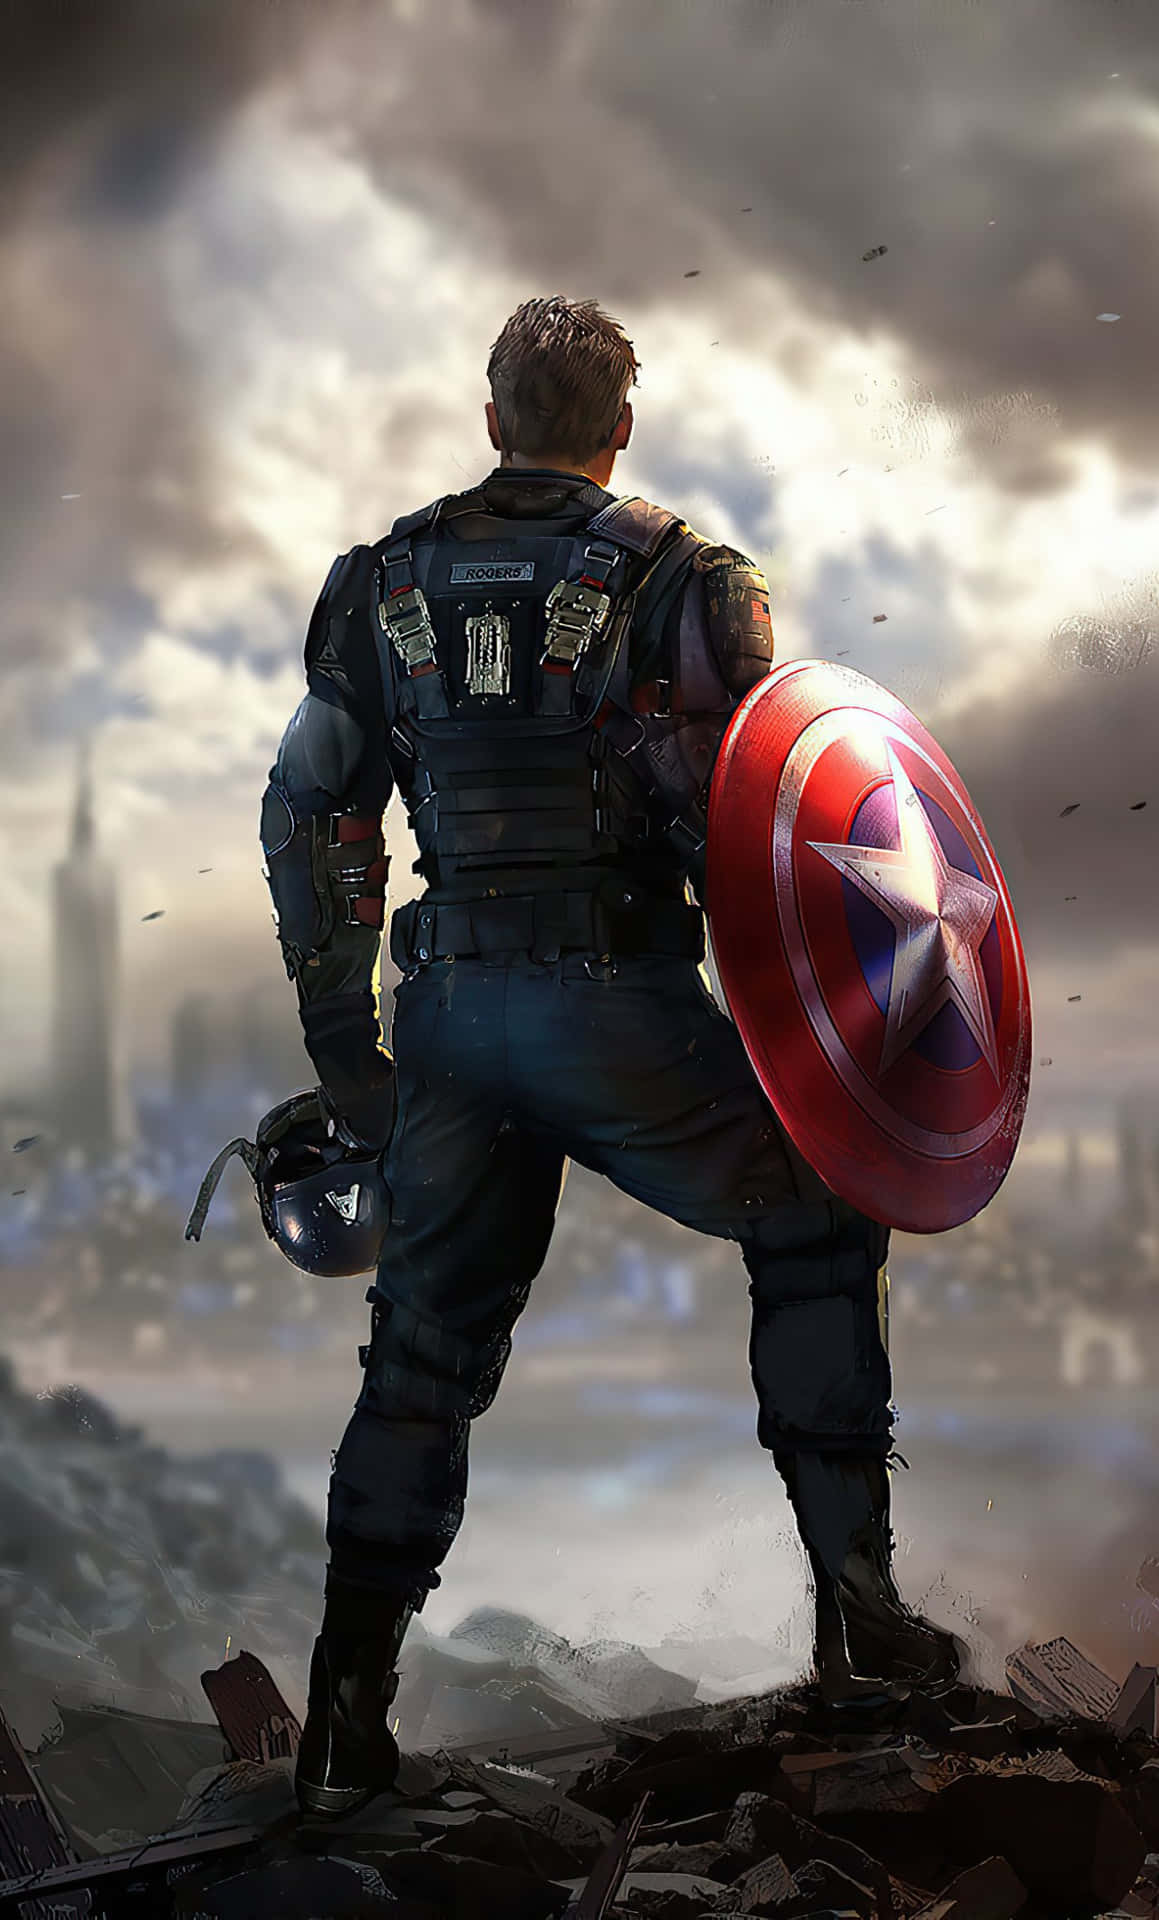 Captain America is Ready To Fight!